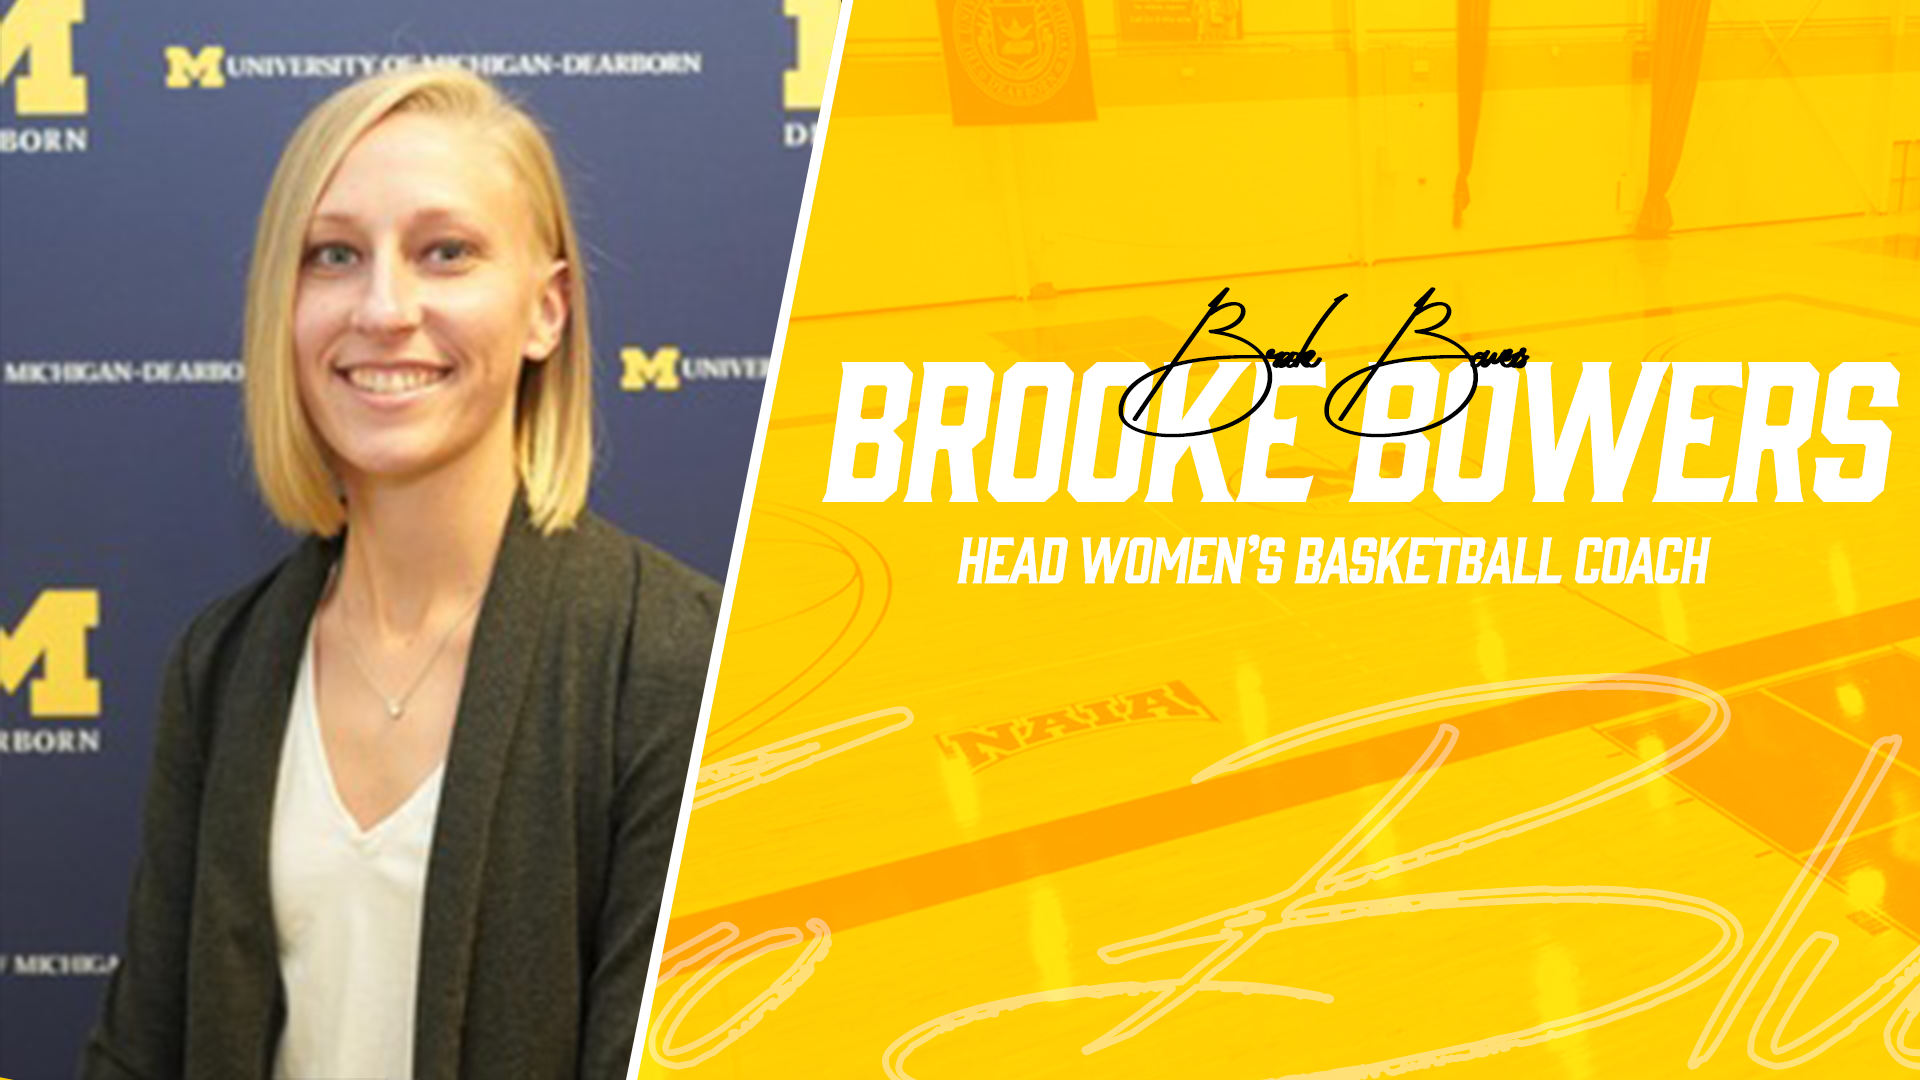 Interim Tag Removed as Brooke Bowers Becomes Head Women's Basketball Coach